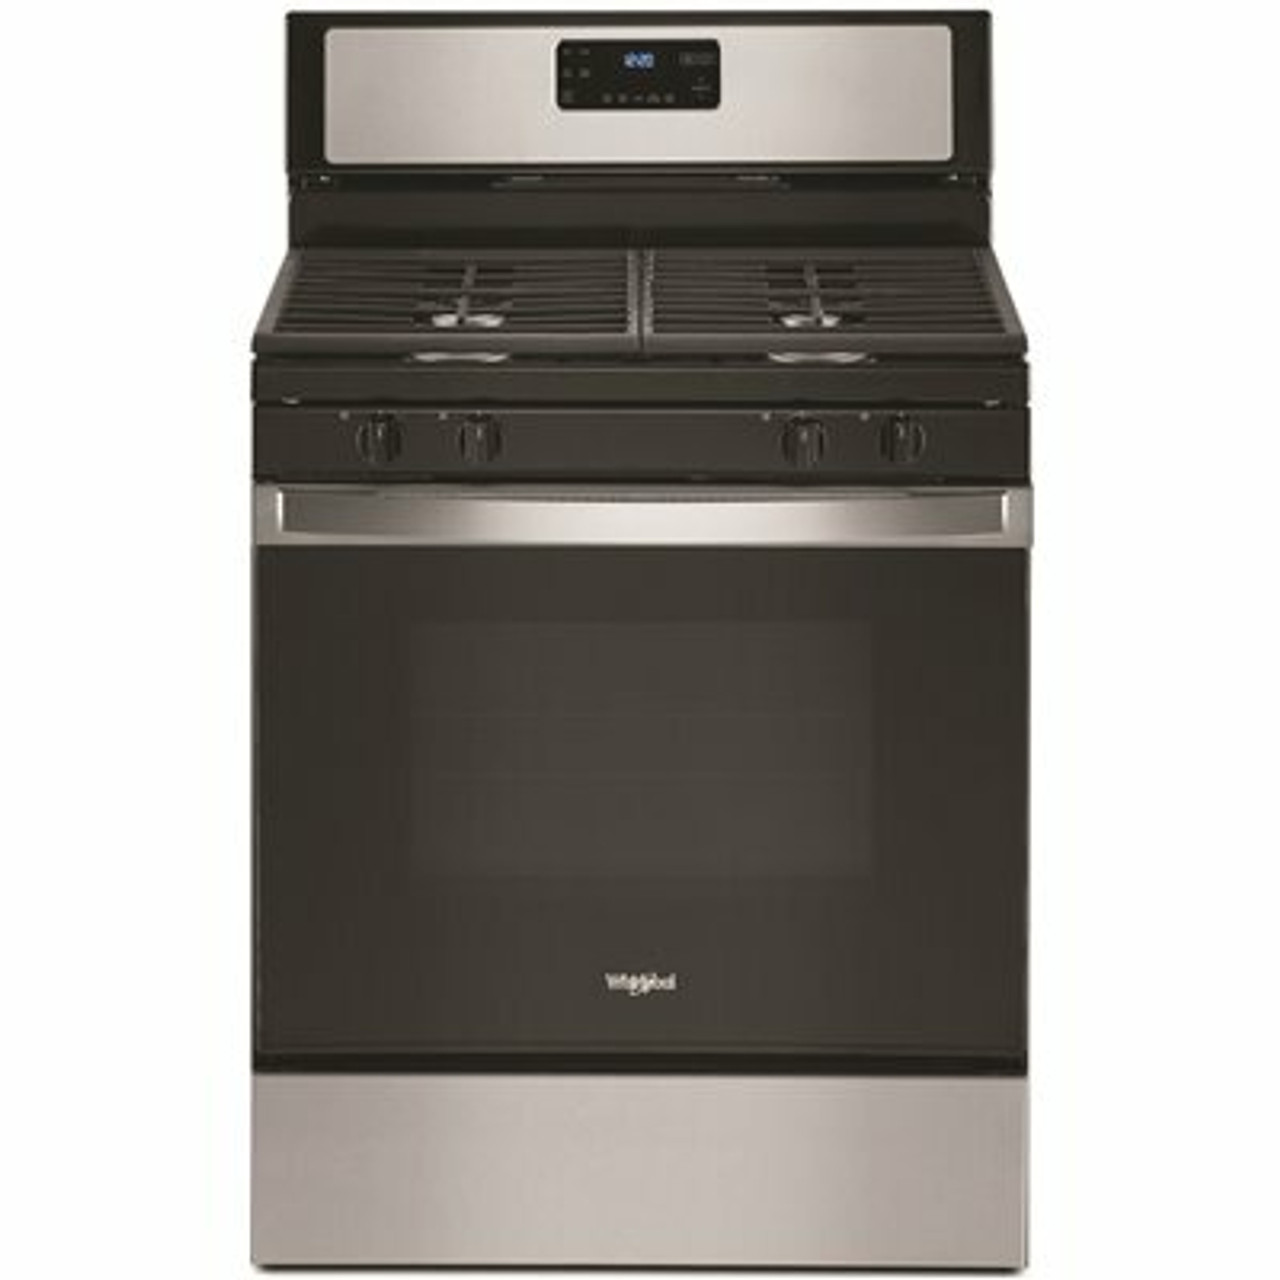 Whirlpool 5.0 Cu. Ft. Gas Range With Self-Cleaning And Speed Heat Burner In Stainless Steel